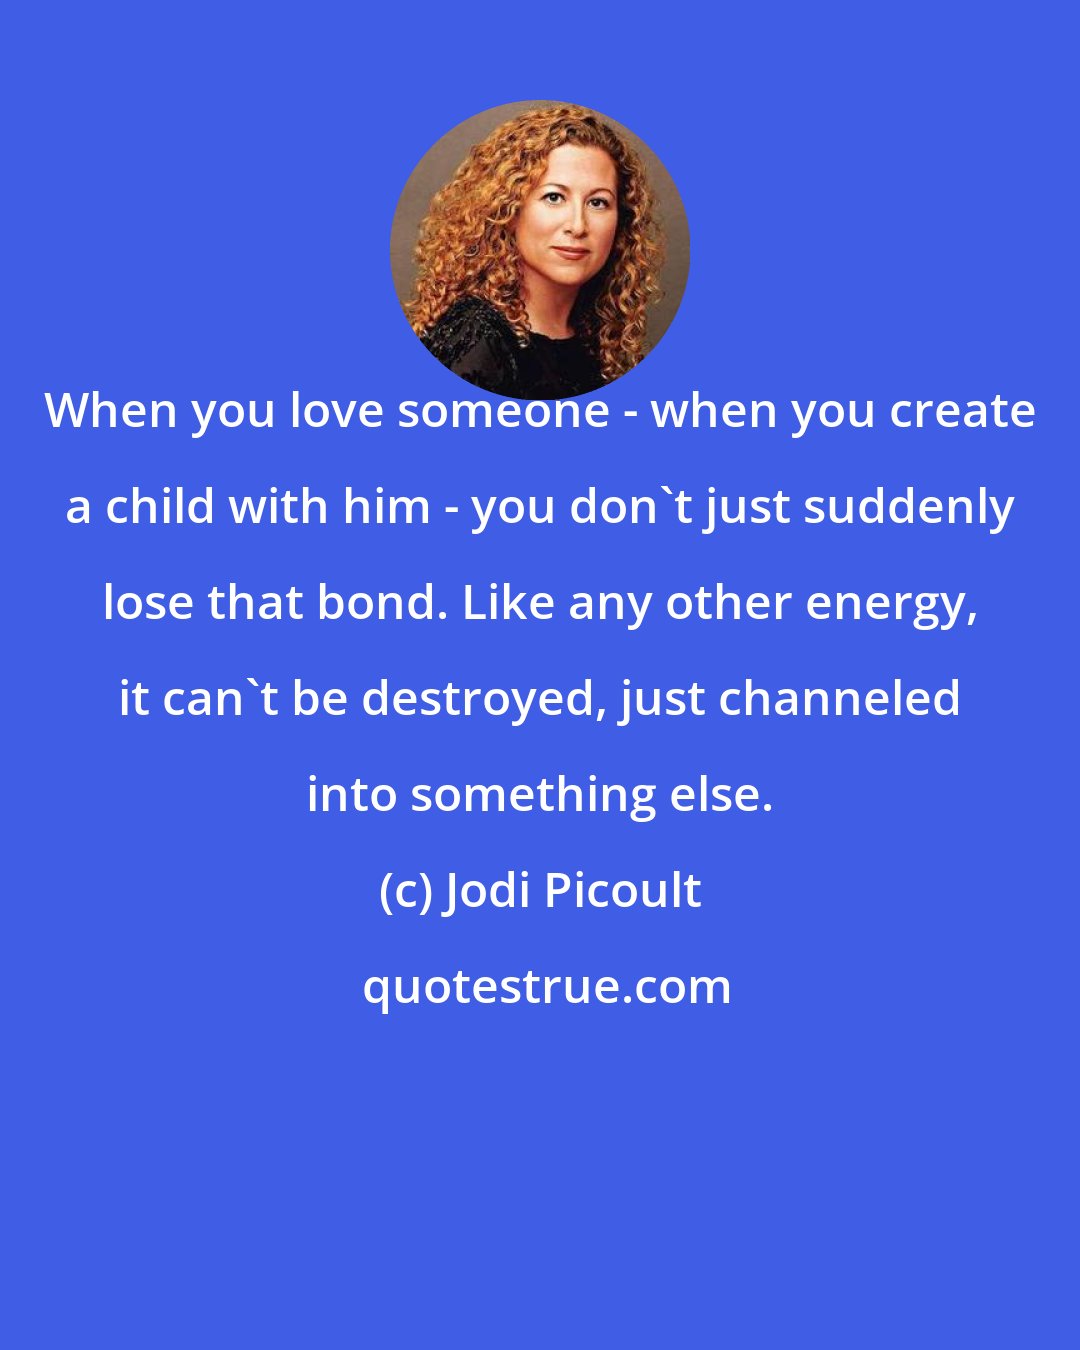 Jodi Picoult: When you love someone - when you create a child with him - you don't just suddenly lose that bond. Like any other energy, it can't be destroyed, just channeled into something else.